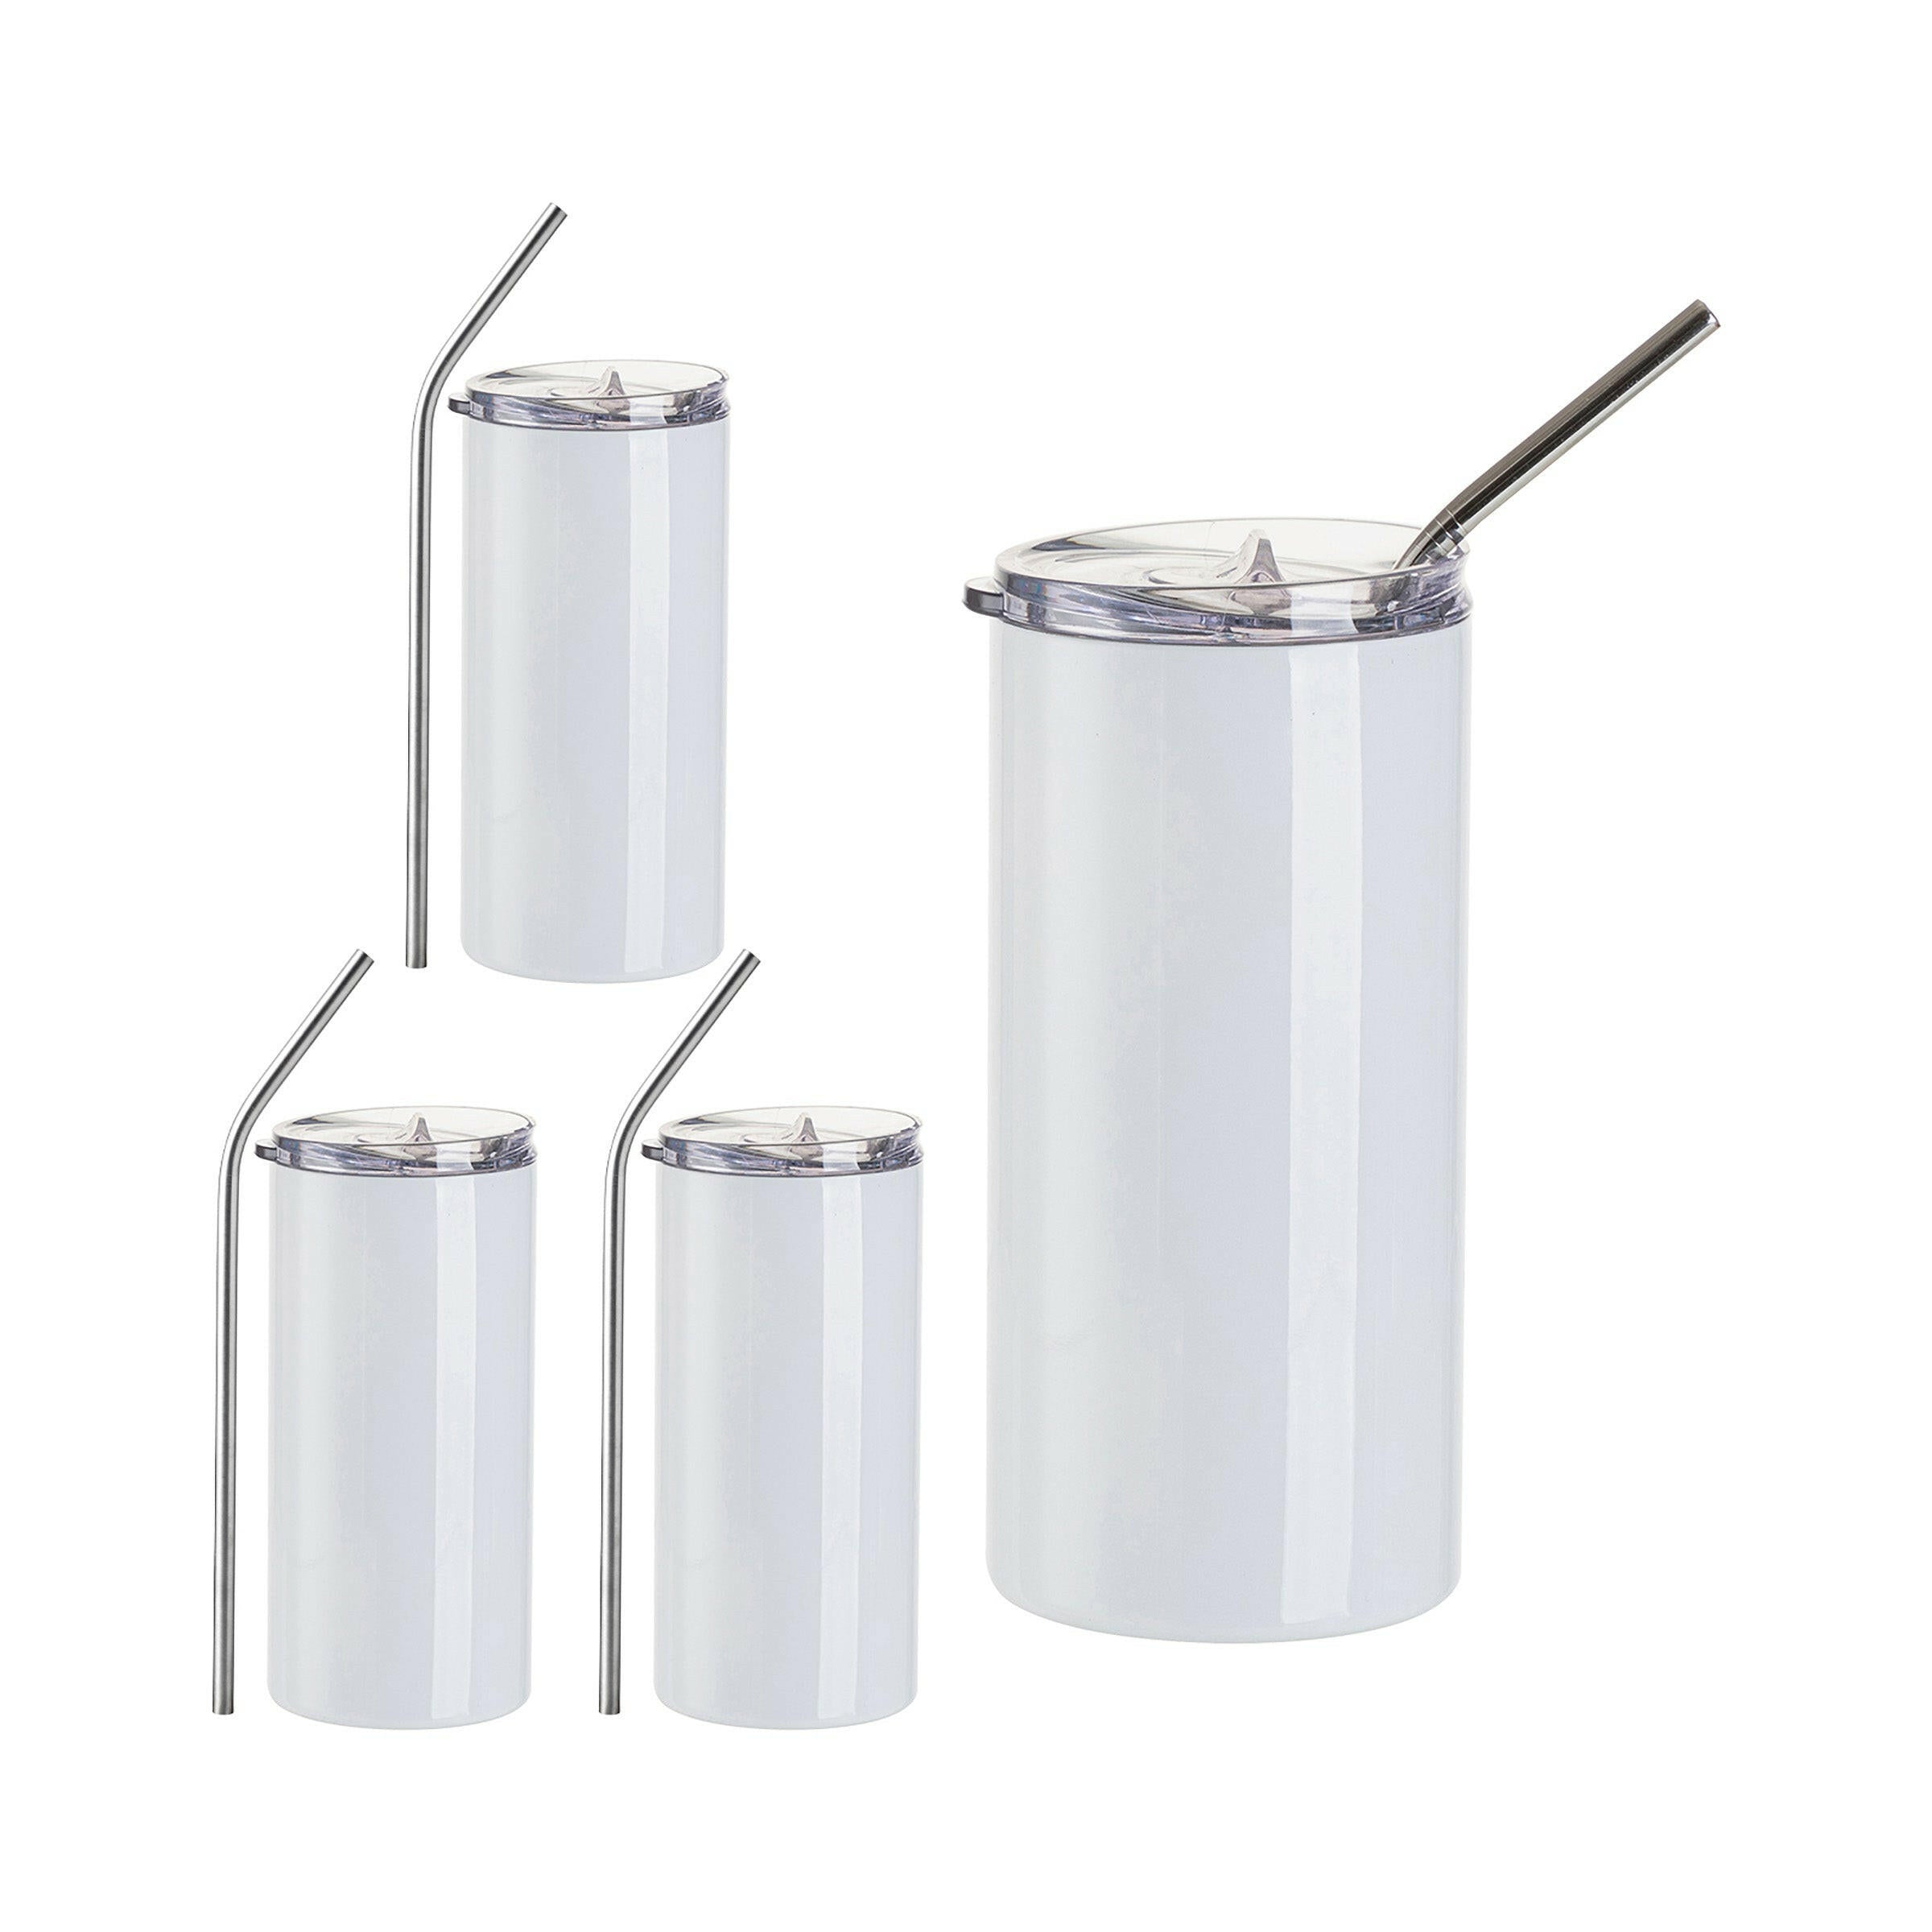 16oz Stainless Steel Skinny Sublimation Tumbler with Lid and Straw - 4 Pack.